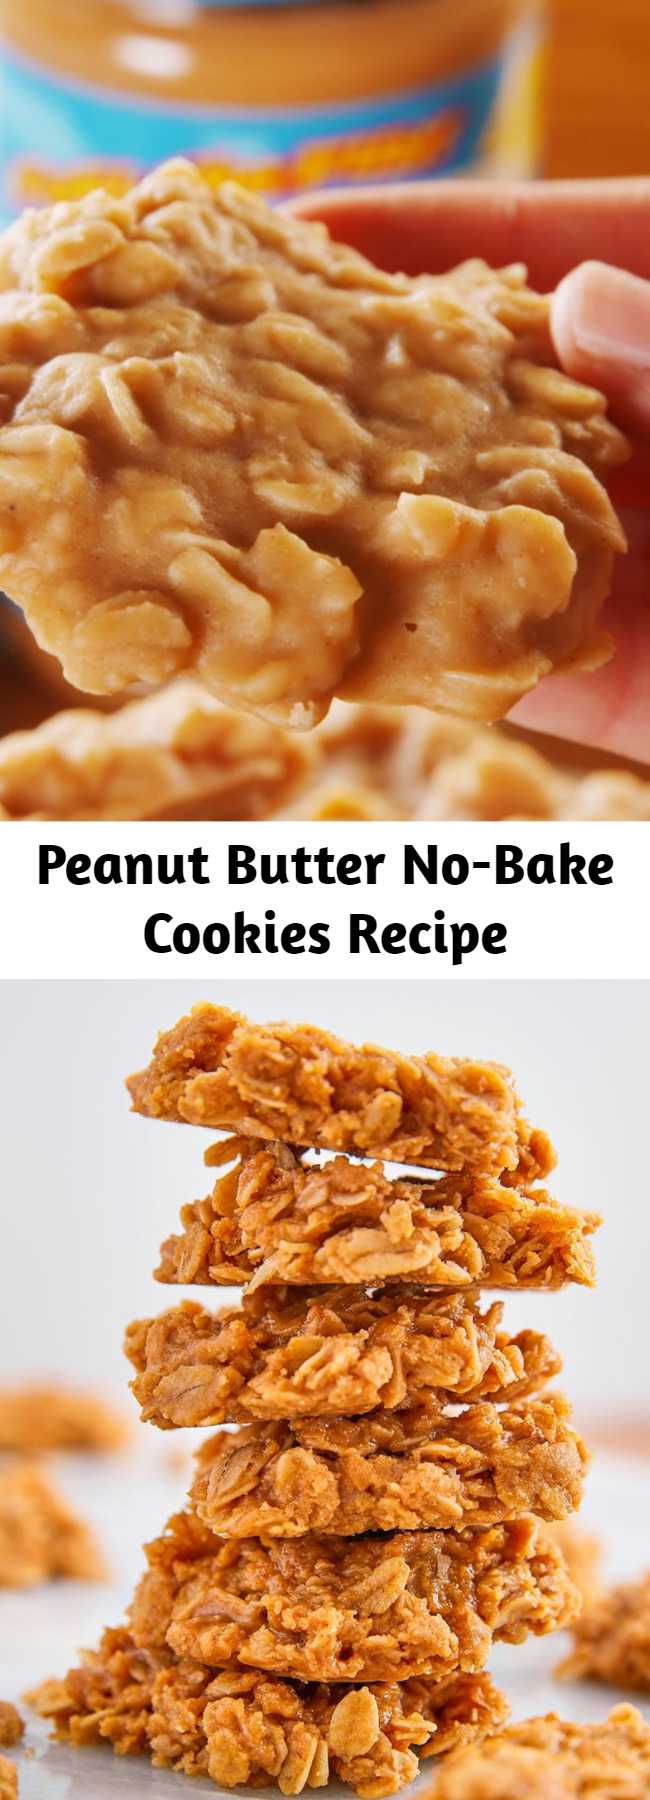 Peanut Butter No-Bake Cookies Recipe - Loaded with sweet-salty peanut butter and chewy oats, these cookies are perfect for when you’re craving dessert but don’t have the time or patience to wait for your oven to preheat. The texture is a bit more fudgy than your average cookie, and WE'RE OBSESSED. #easy #recipe #nobake #oatmeal #peanut #peanutbutter #butter #PB #healthy #salt #vanilla